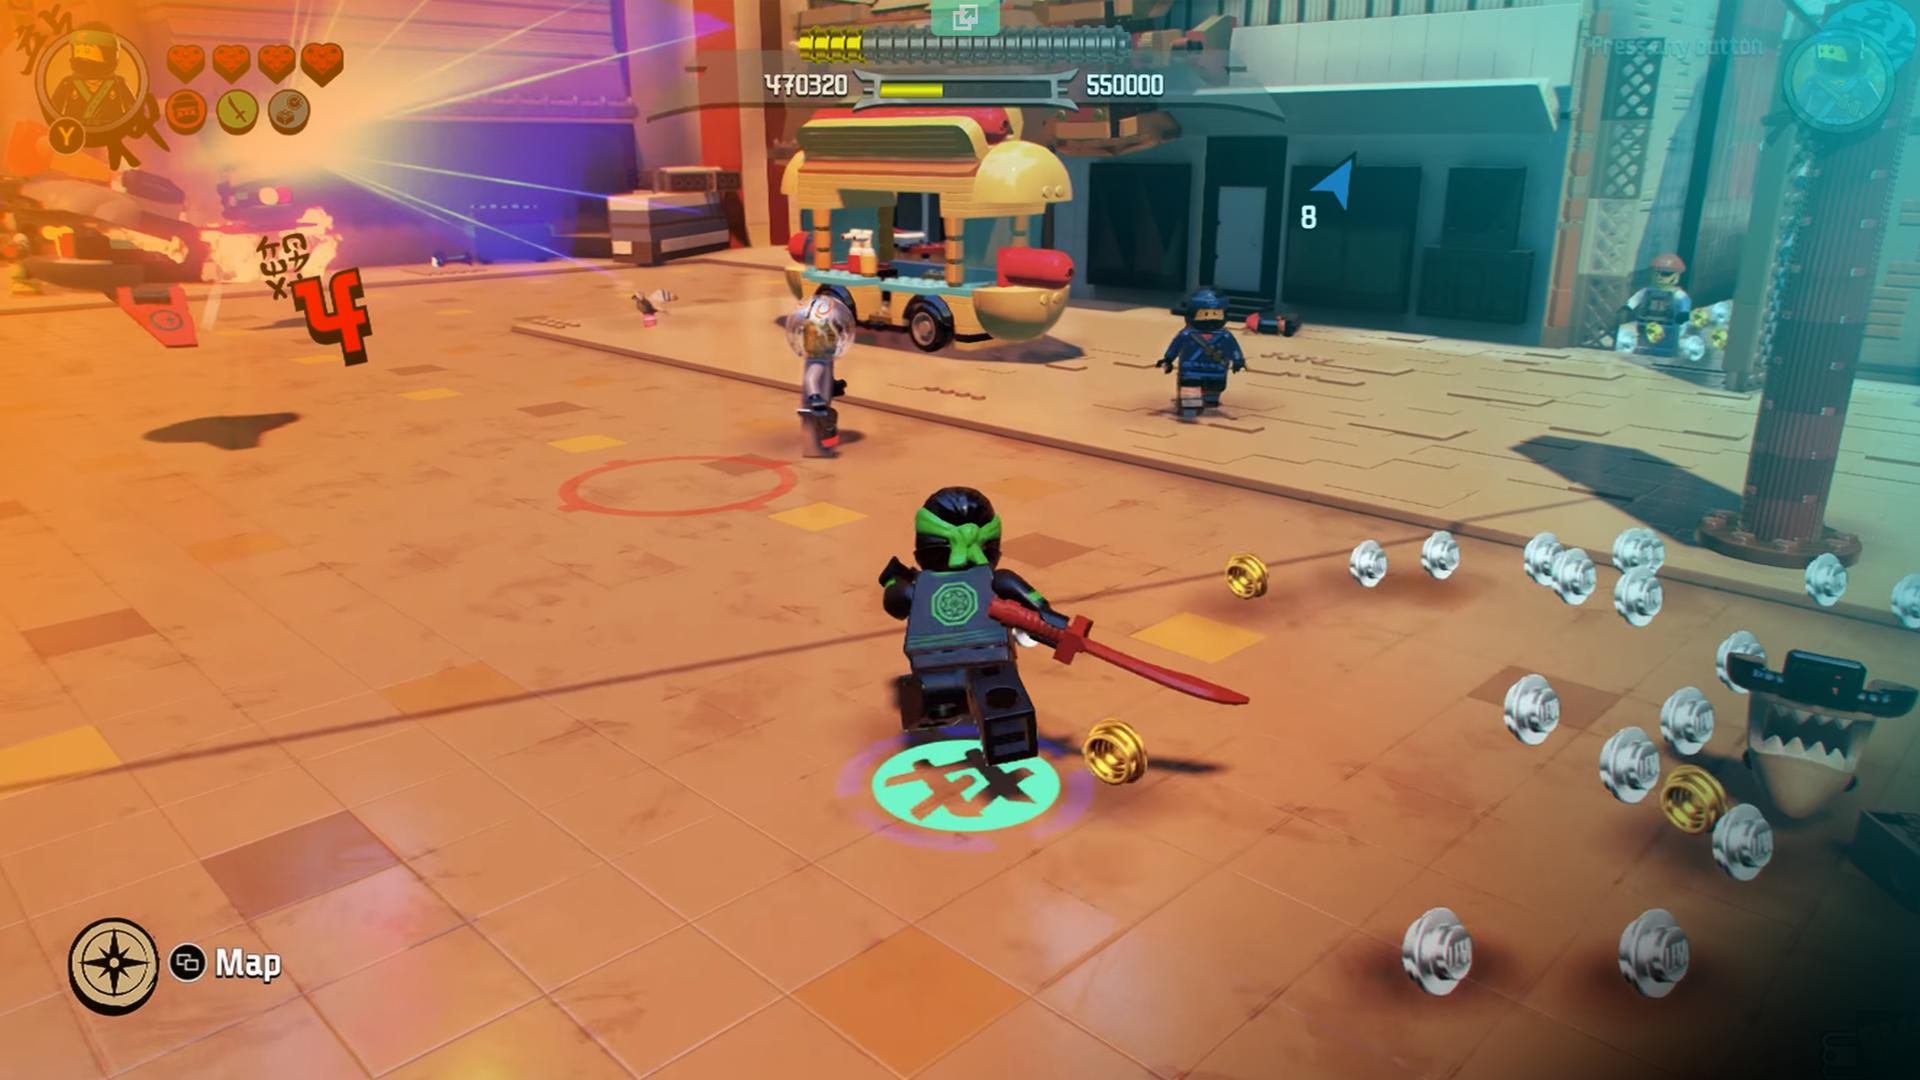 Lego ninjago game for android free download latest version